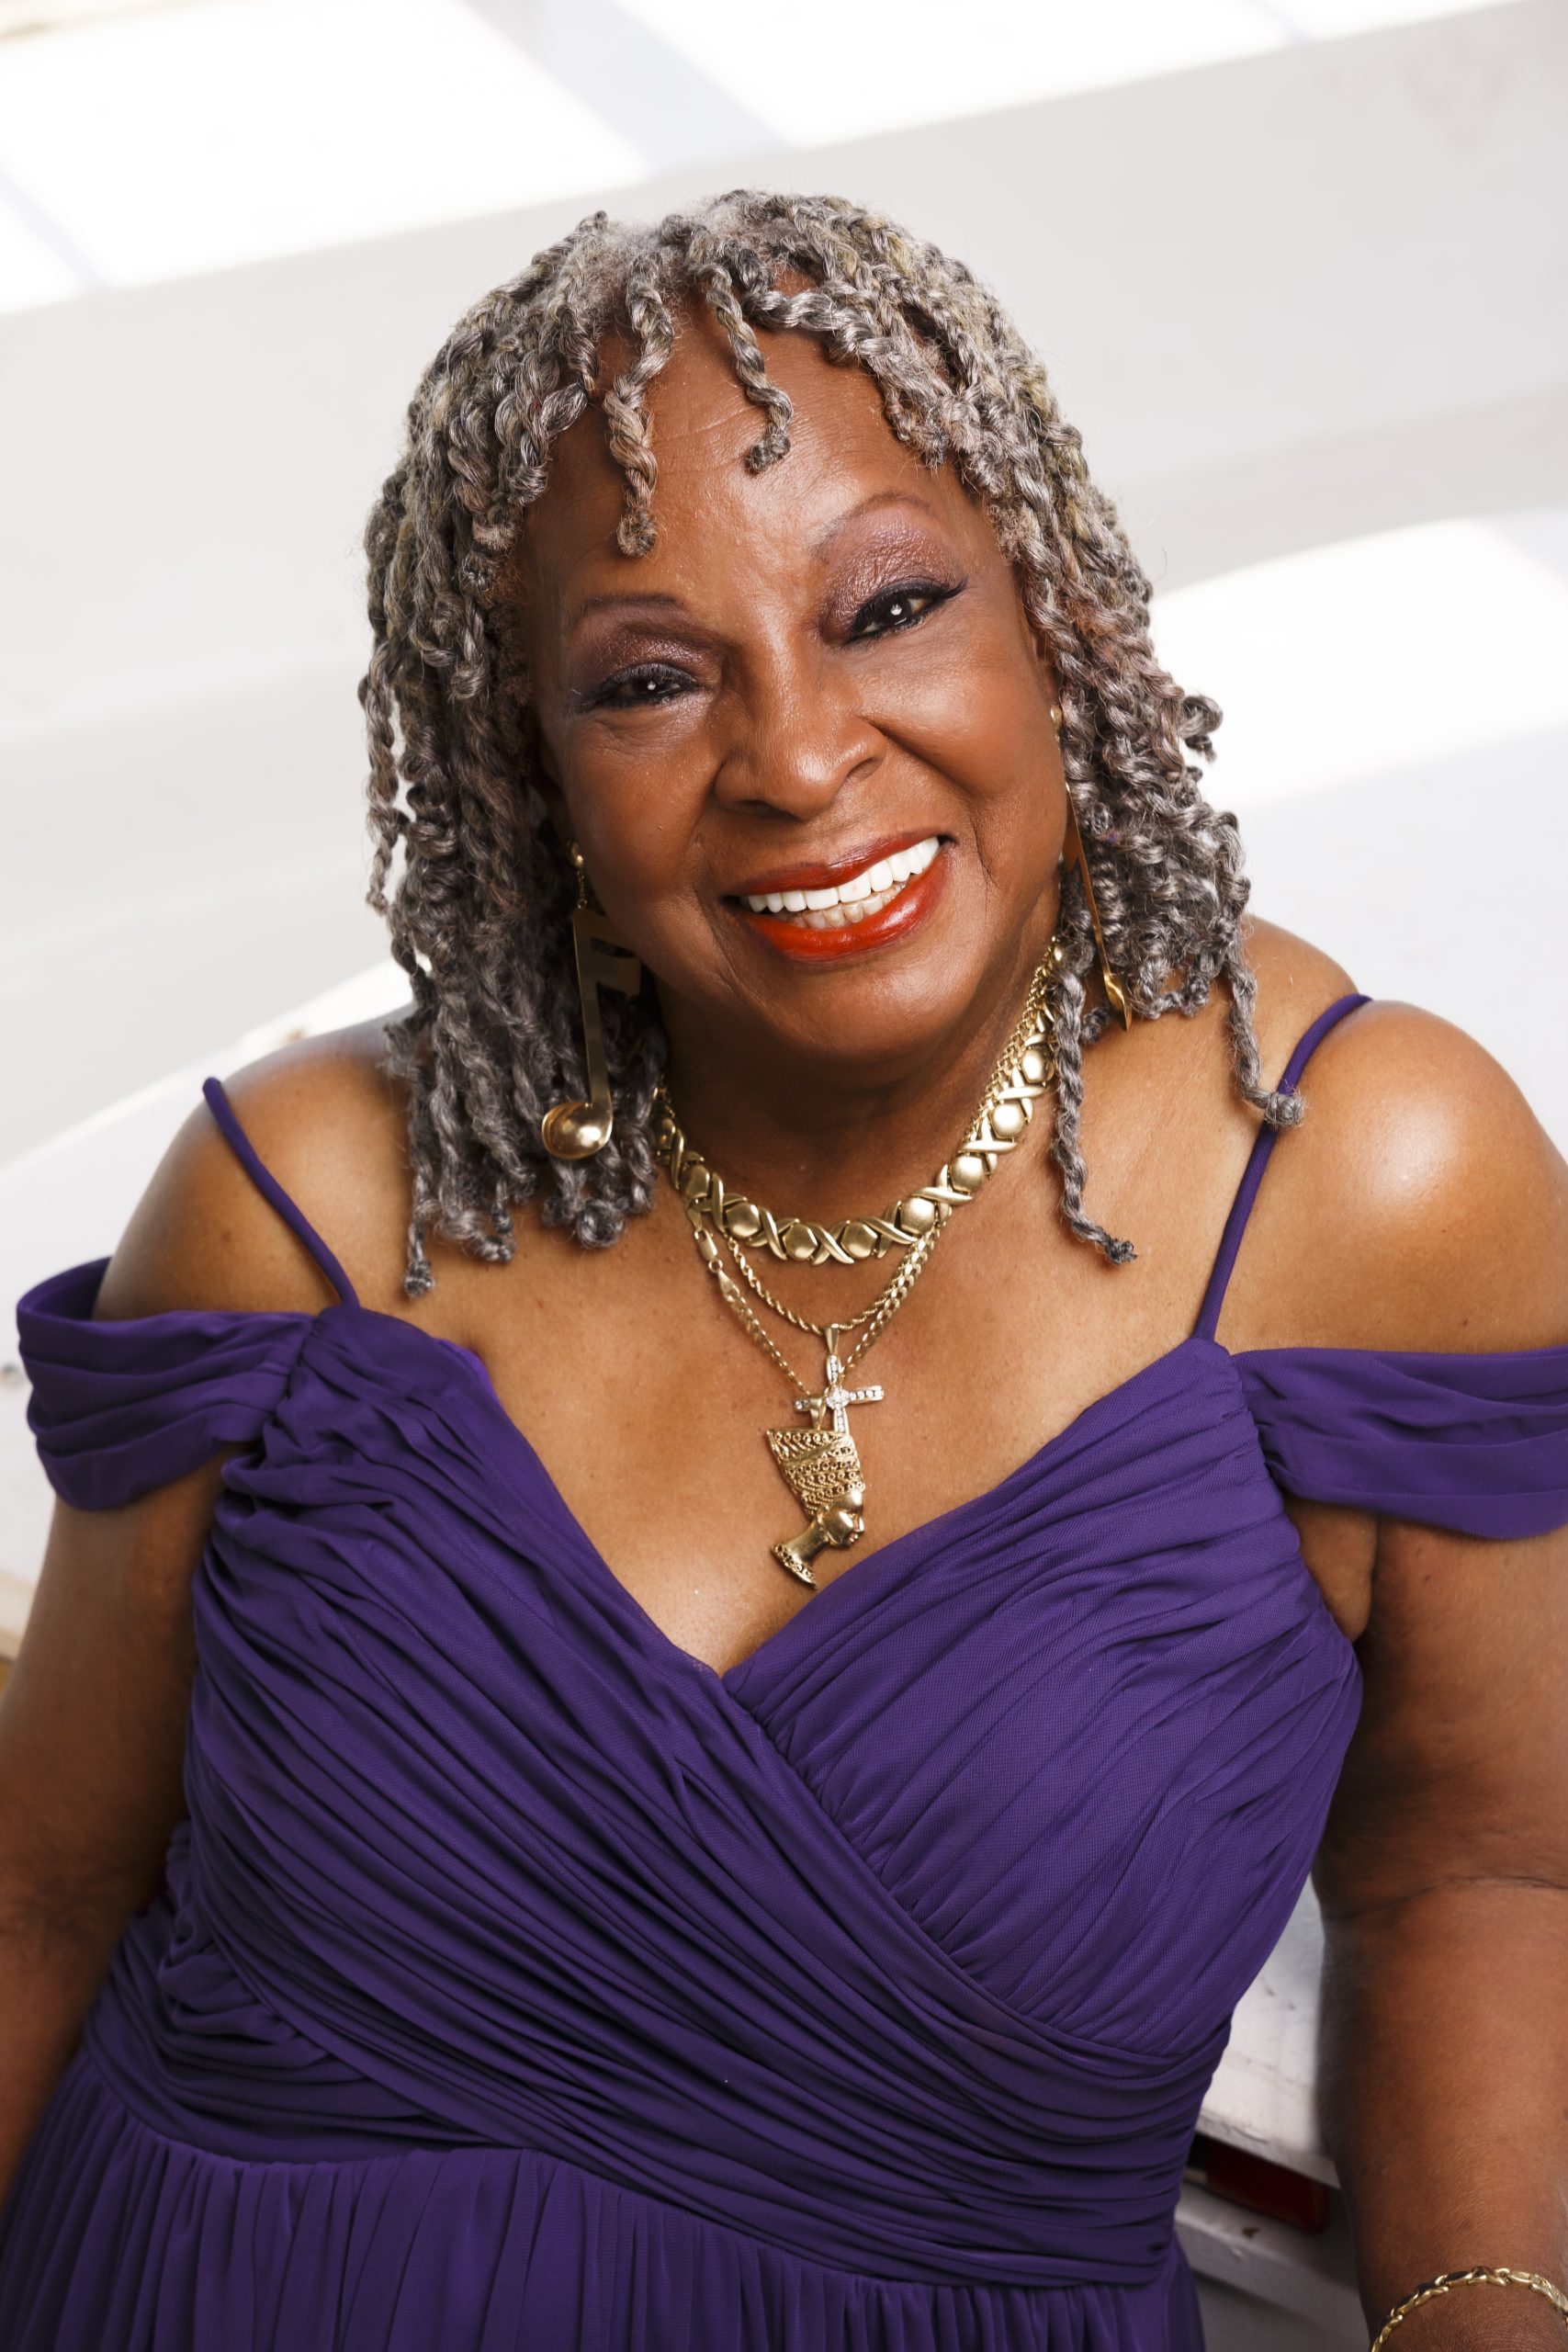 FANS WILL BE “DANCING IN THE STREET” WHEN ENTERTAINER MARTHA REEVES IS HONORED WITH STAR ON THE HOLLYWOOD WALK OF FAME